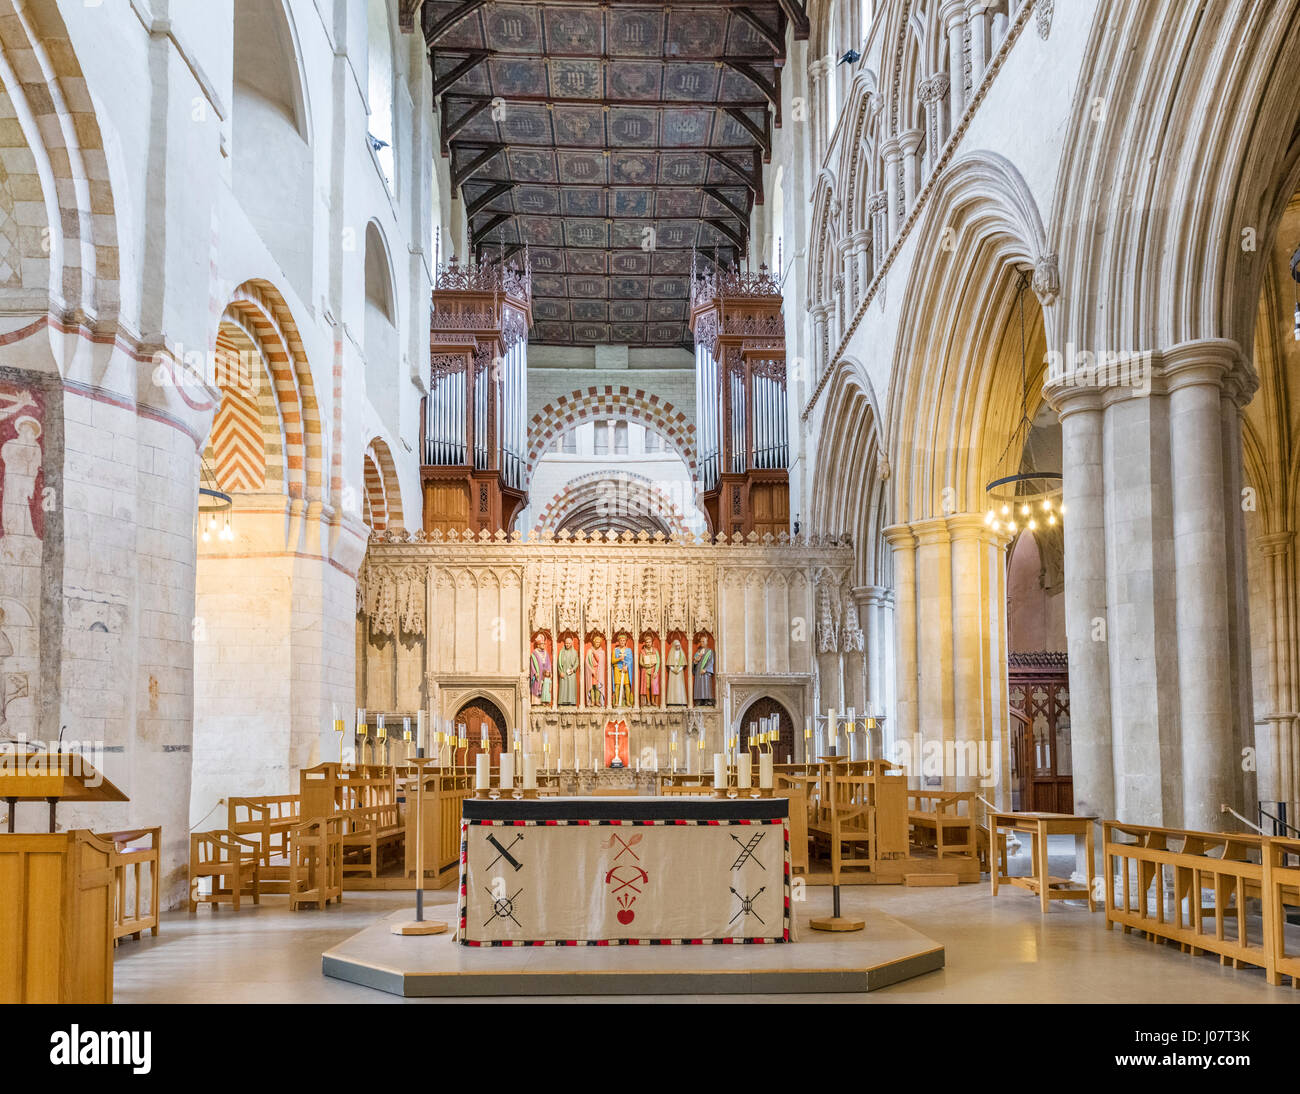 St Albans Cathedral. Nave Sanctuary of the Cathedral and Abbey Church of St Alban, St Albans, Hertfordshire, England, UK Stock Photo